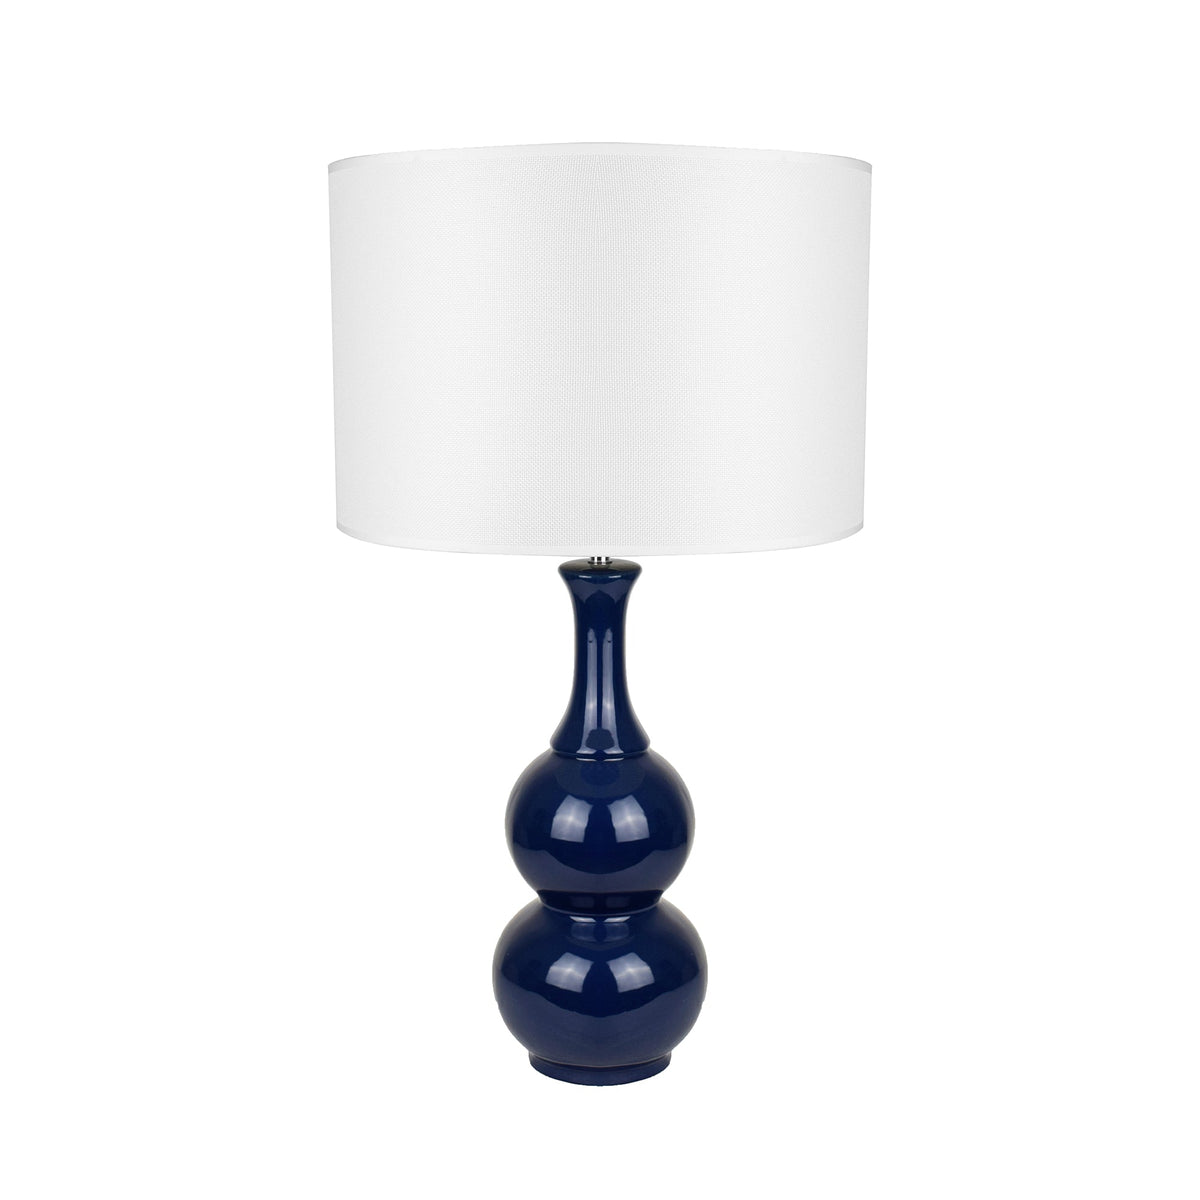 Pattery Barn Table Lamp - Blue